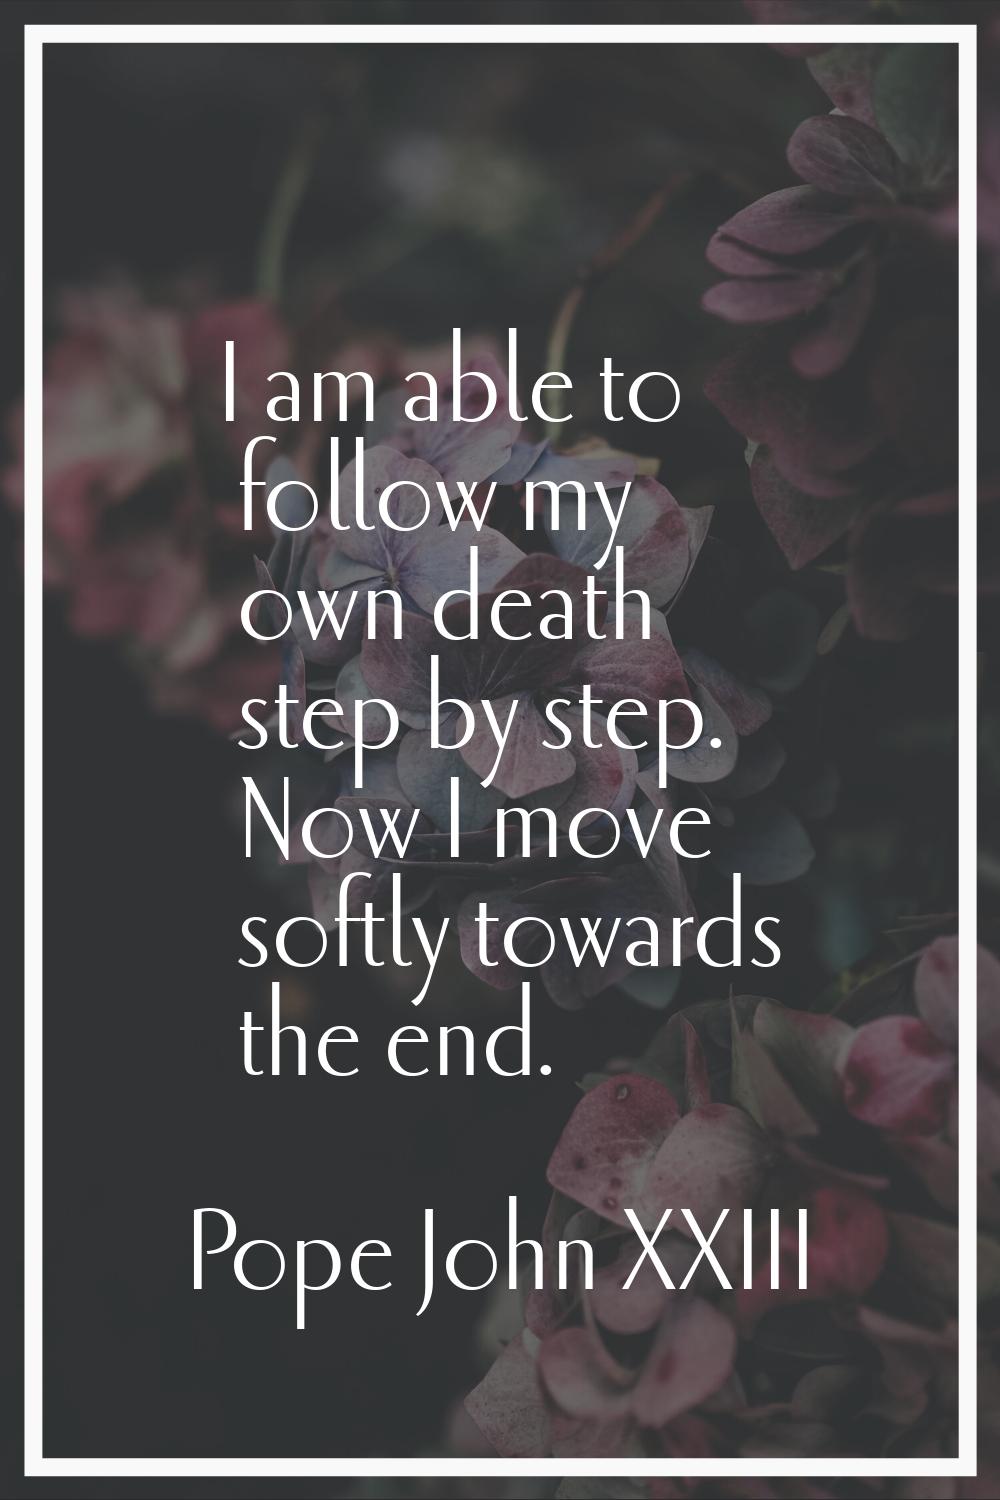 I am able to follow my own death step by step. Now I move softly towards the end.